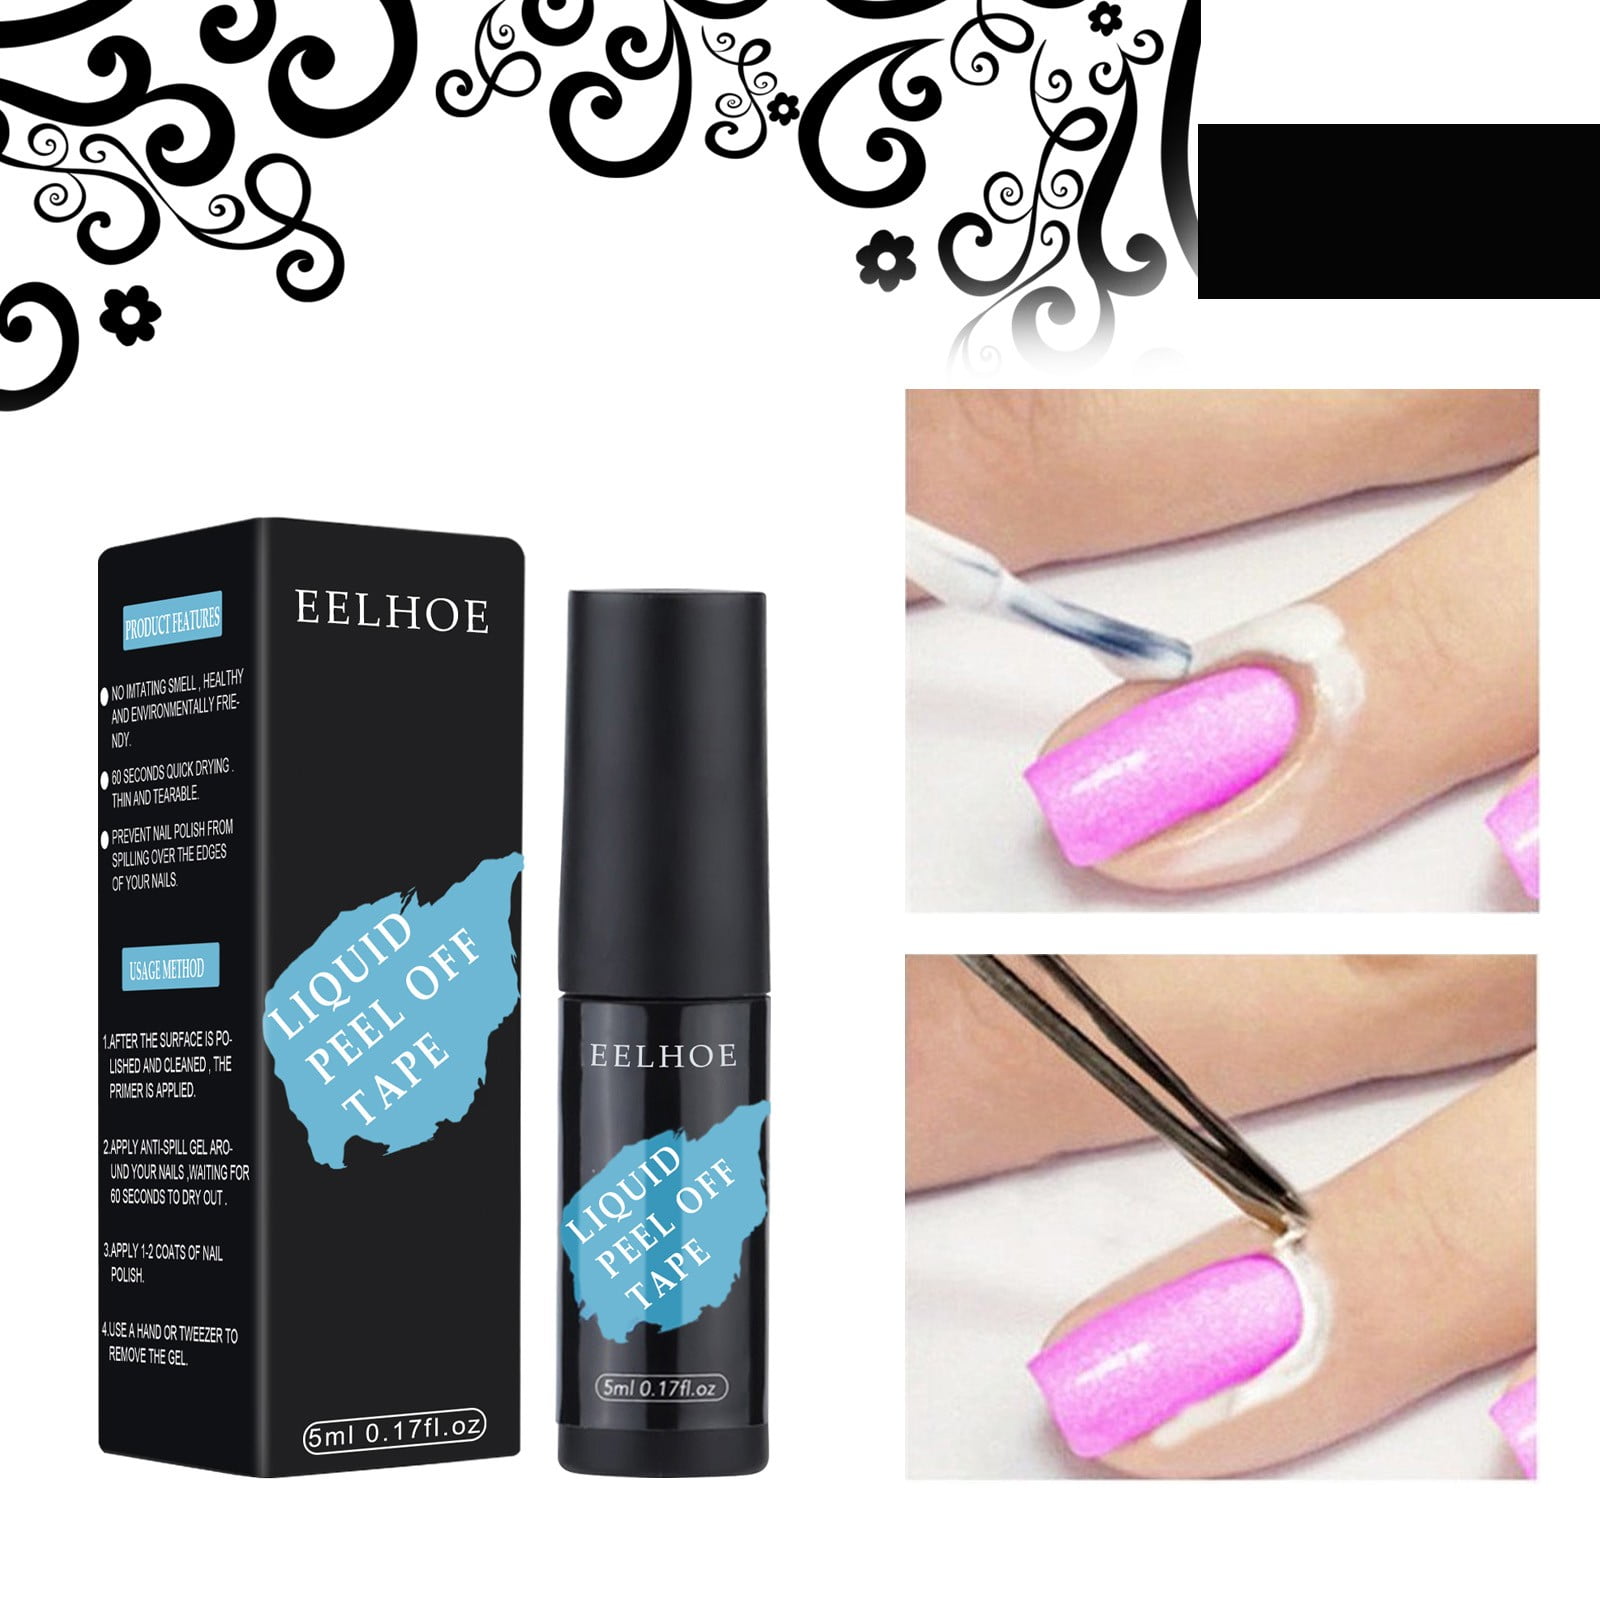 Liquid Latex for Nails - 20ML Upgraded Fast Drying Peel Off Nail Polish  Barrier Cuticle Guard, Stamping Skin Protector Latex Tape with Bonus  Tweezers for Various Nail Art by DR.MODE